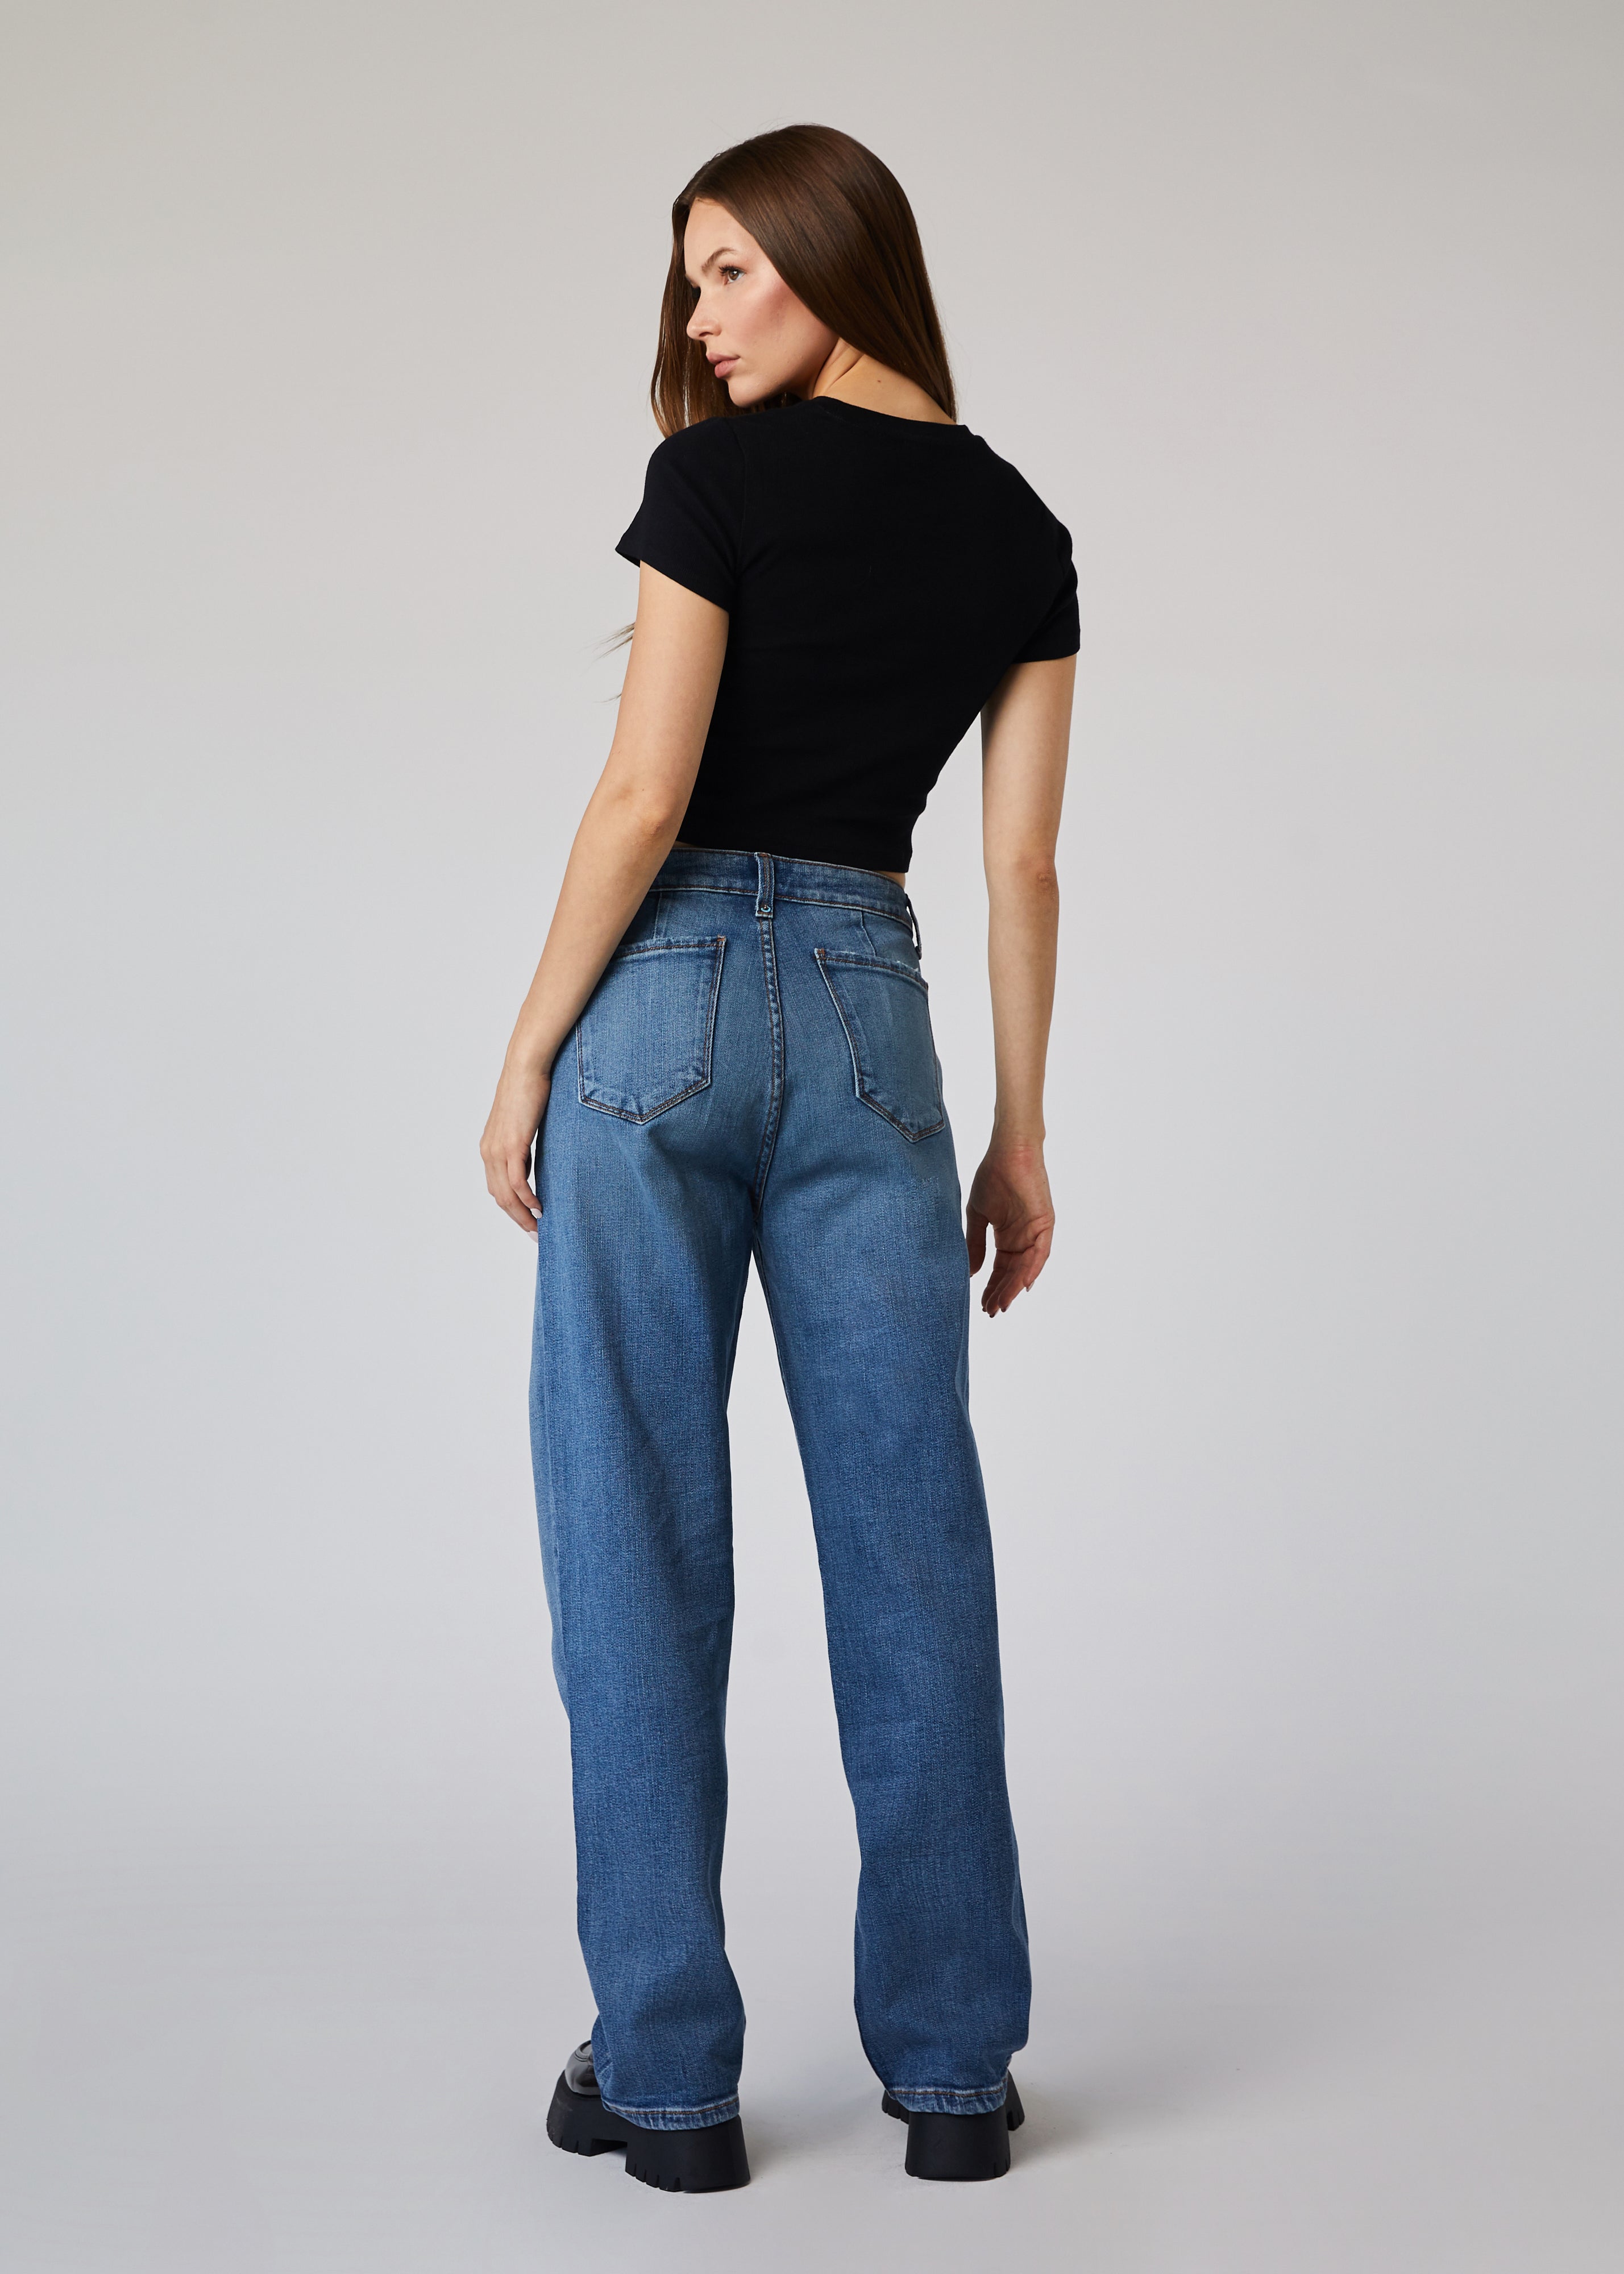 Women's Baggy Jeans: Embrace Comfort & Style with Trendy Denim